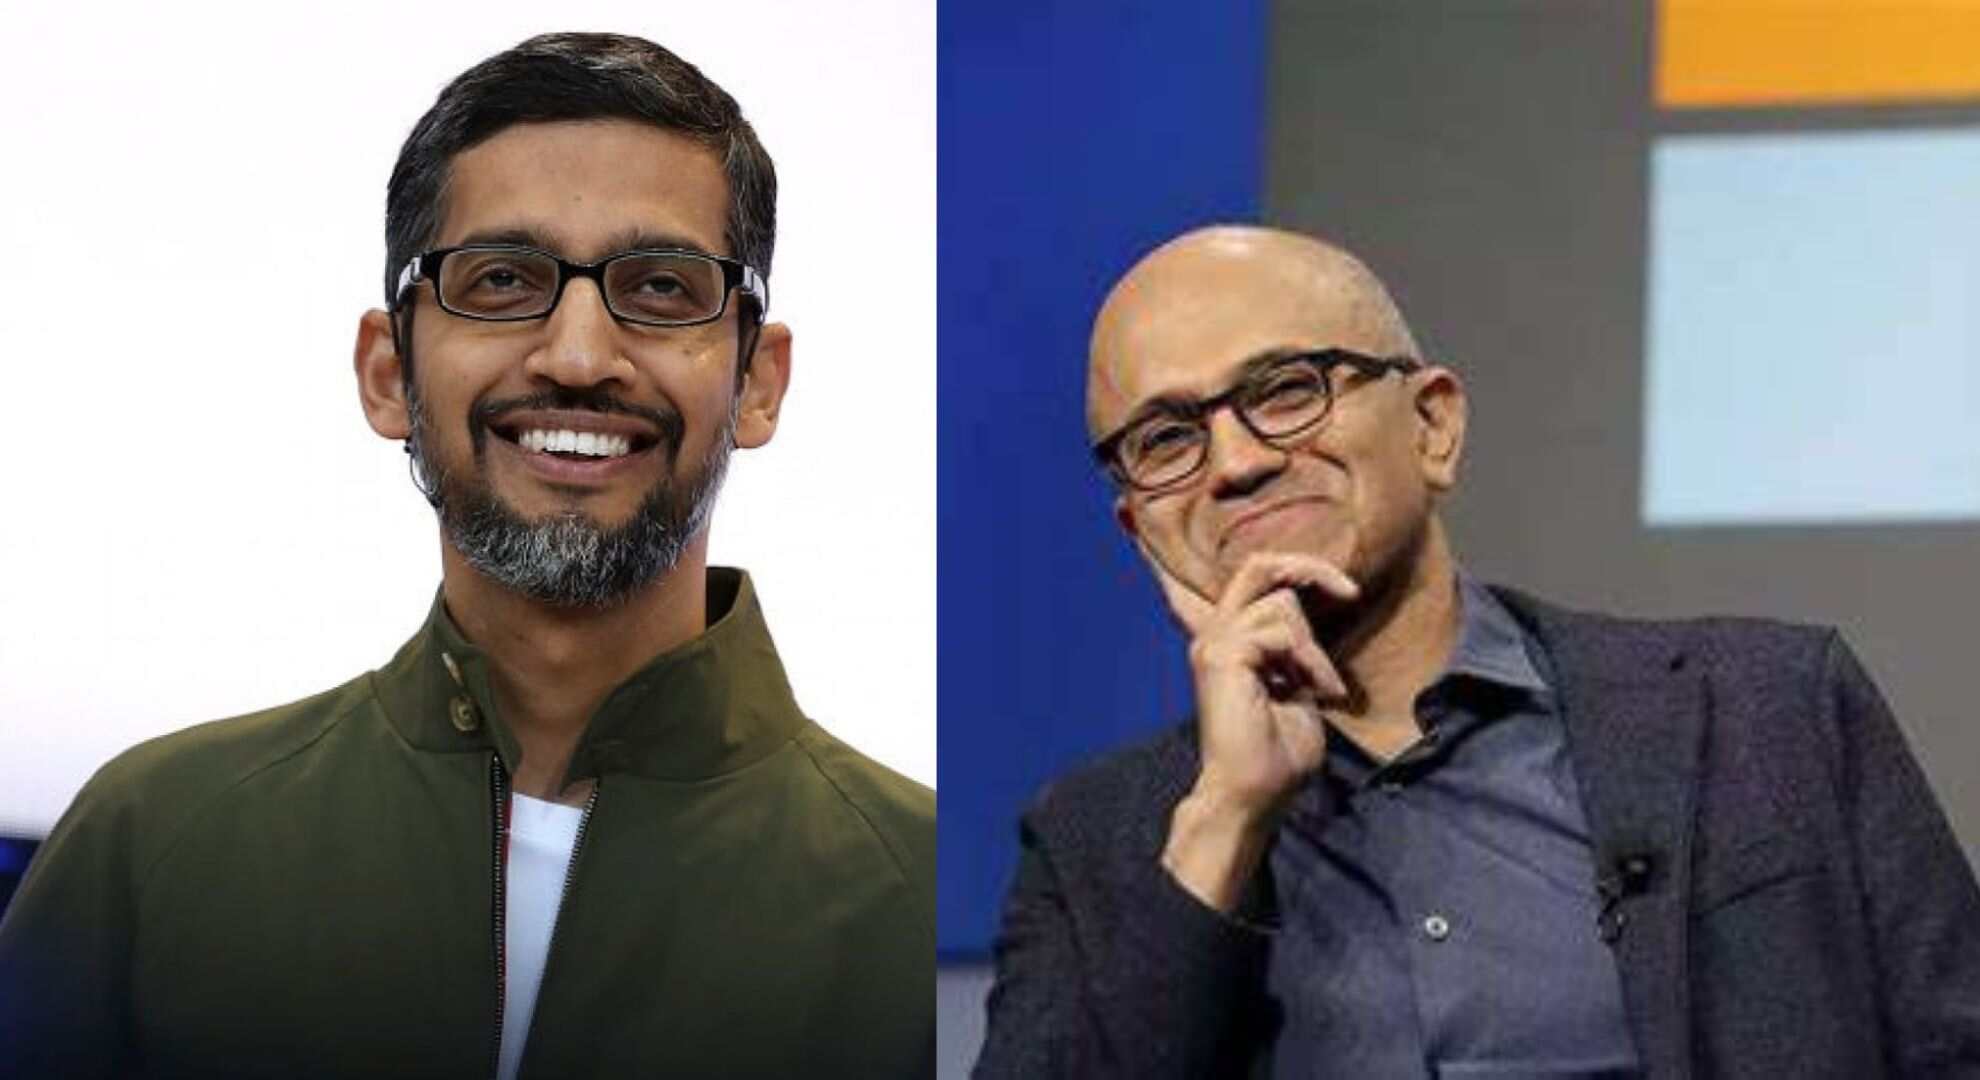 The highest-paid CEO of Indian descent in the US isn't Sundar Pichai or Satya Nadella.